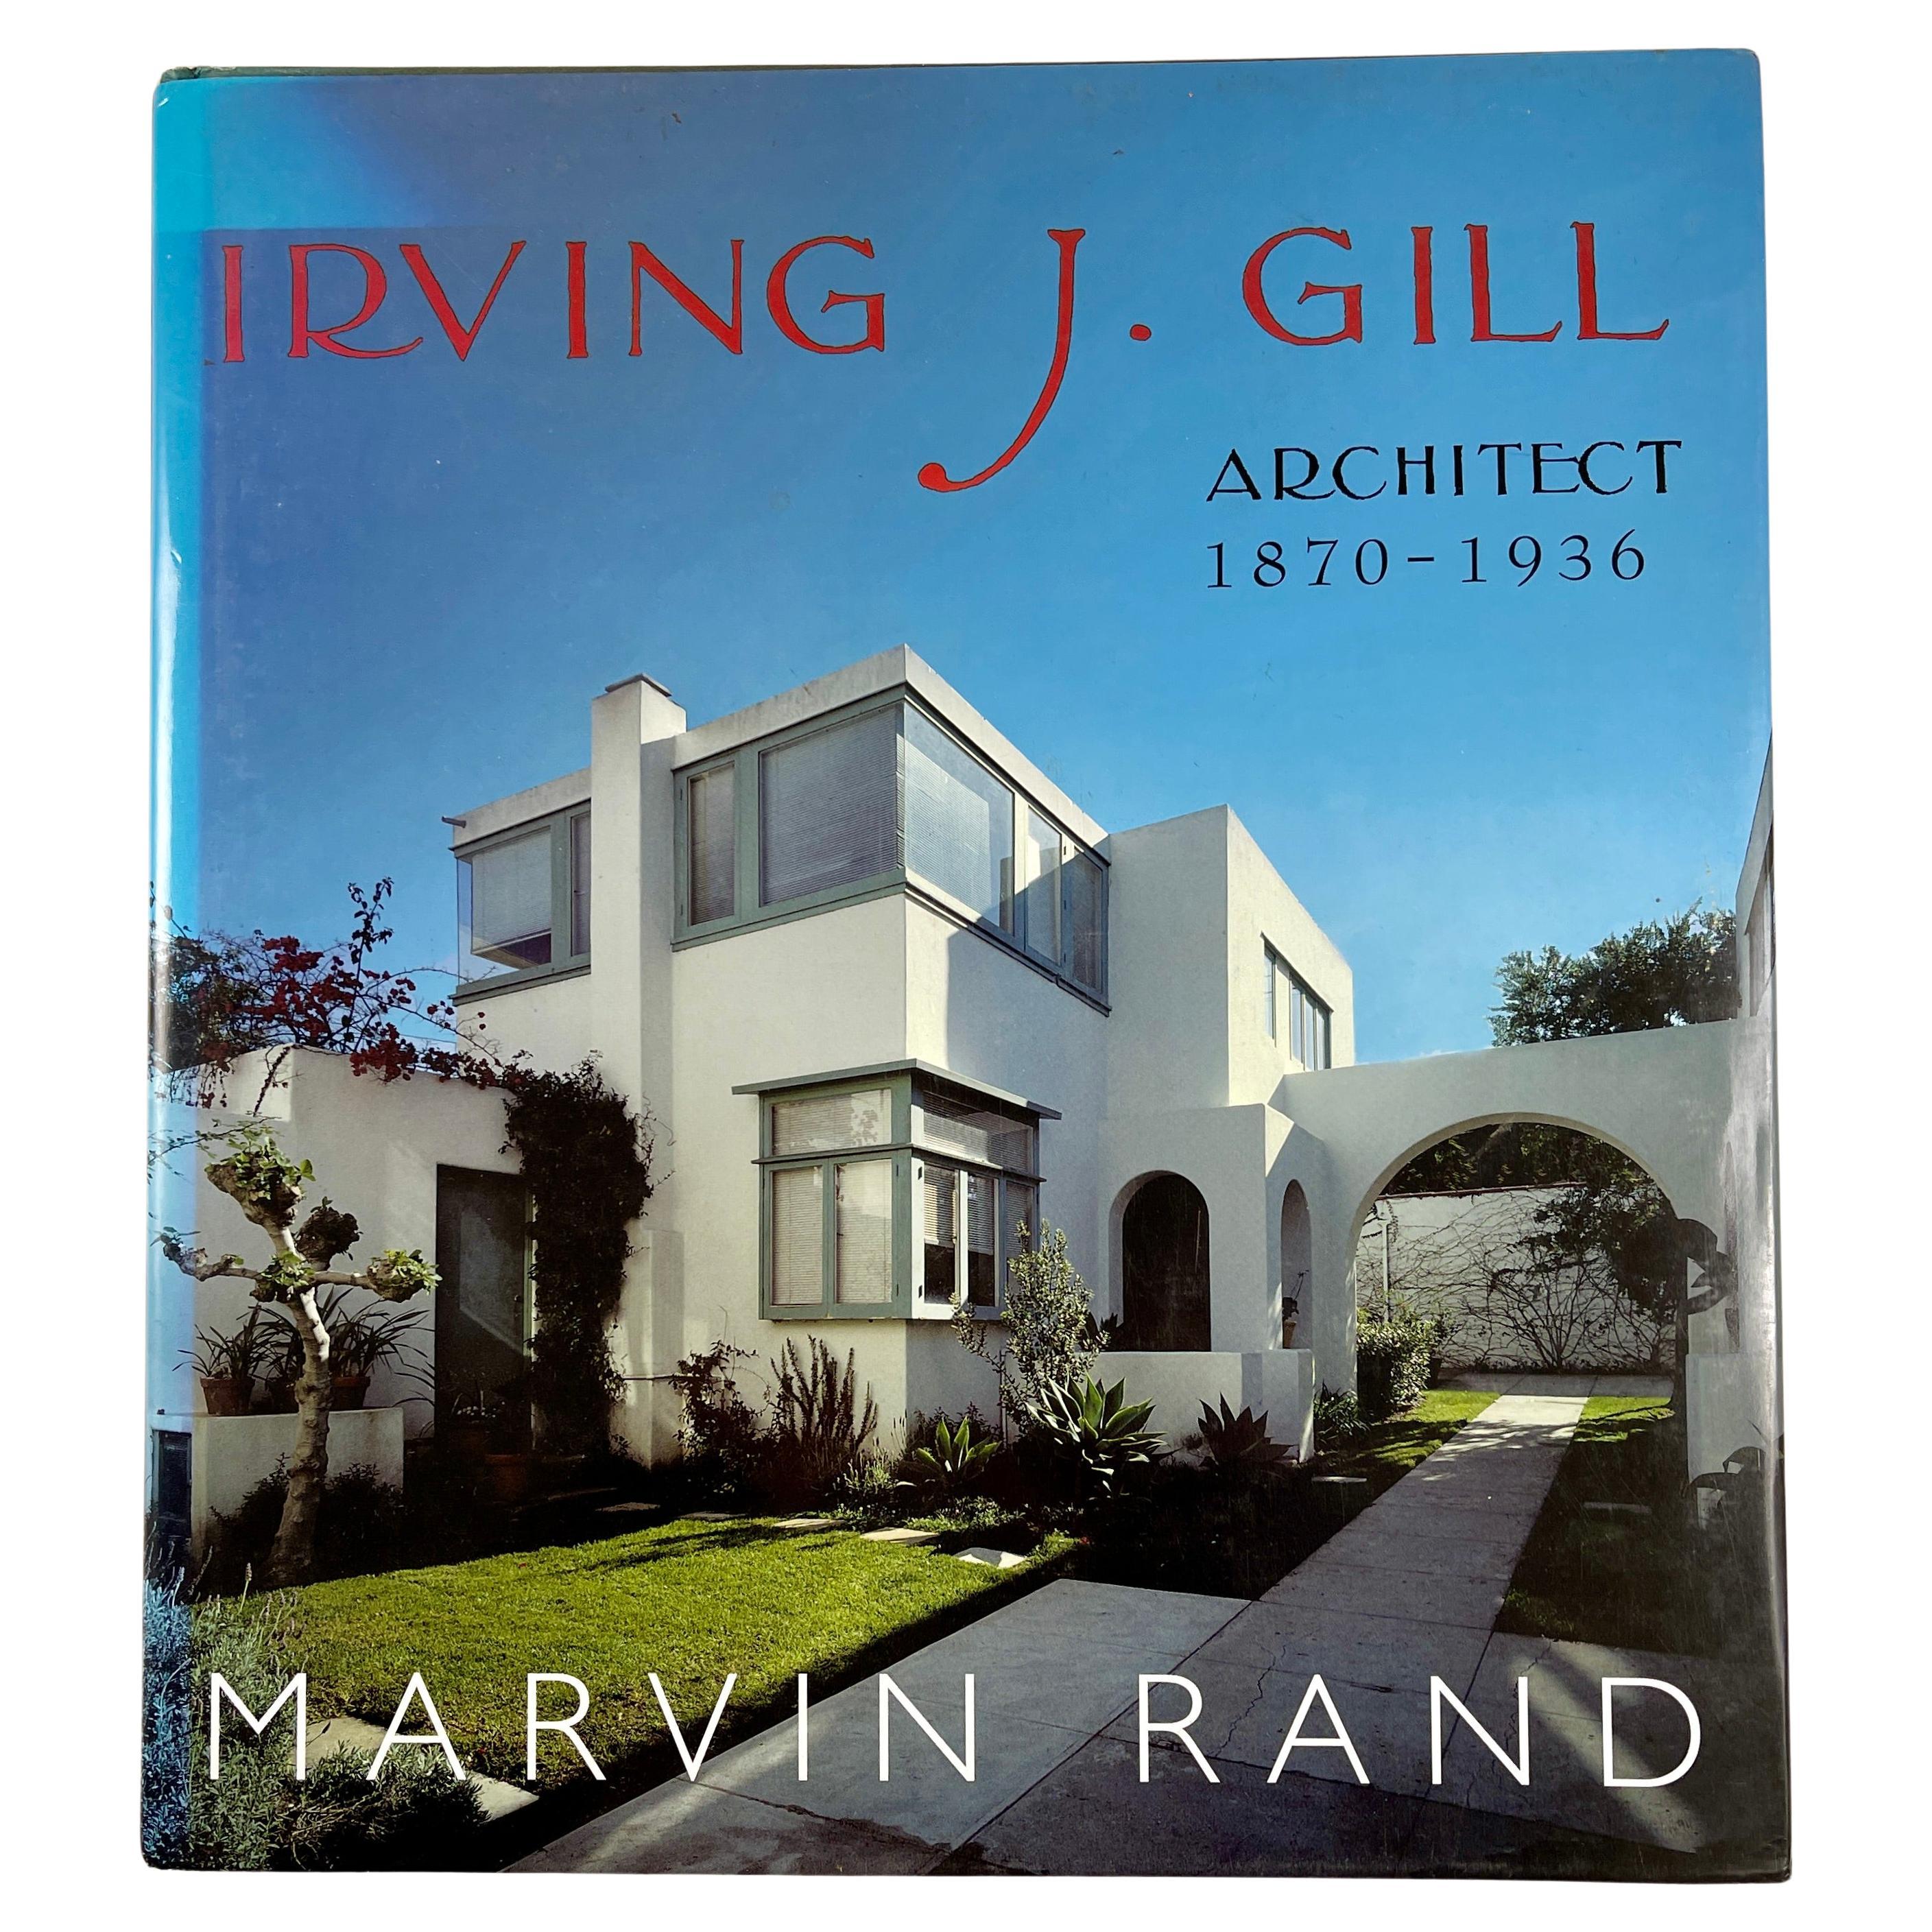 Irving J. Gill, Architect, California Architecture Hardcover Book, 2006 For Sale